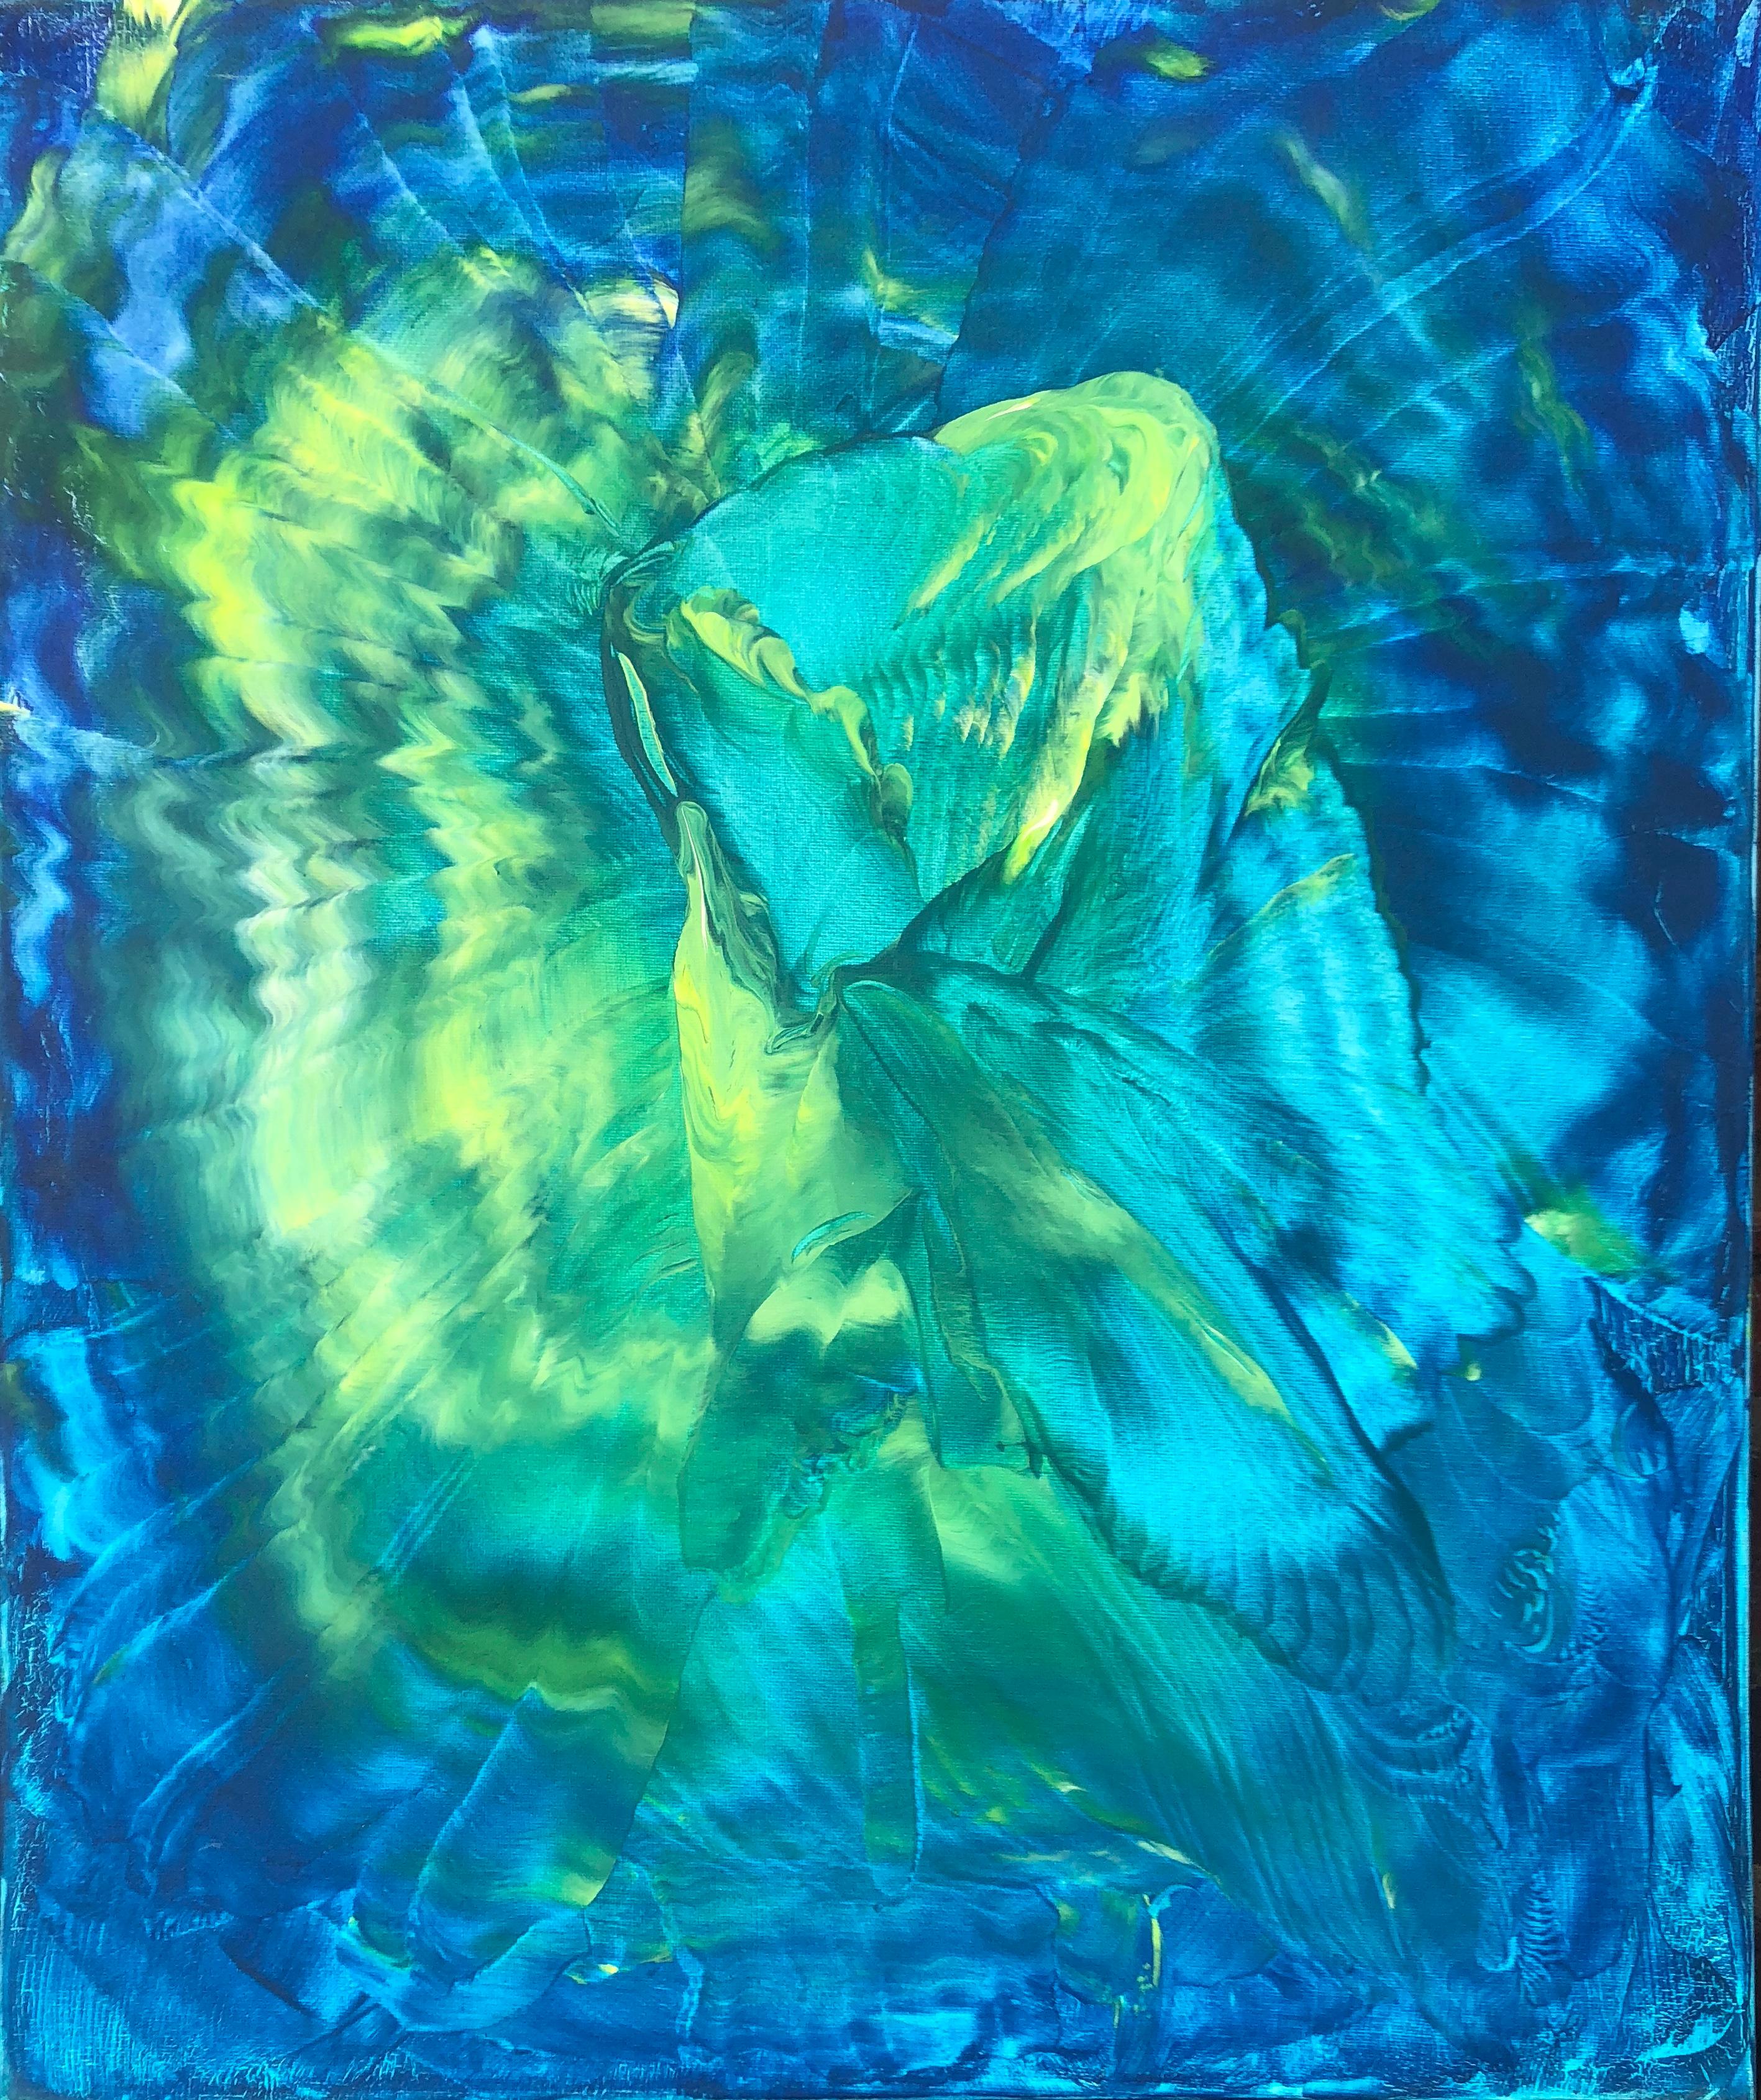 Contemporary abstract painting on canvas by Volodymyr Zayichenko
In blue green and white hue created in 2016.
Unique painting on canvas 60x50cm is guaranteed to be included in a Catalogue Raisonne and provided with a blockchain based Certificate of